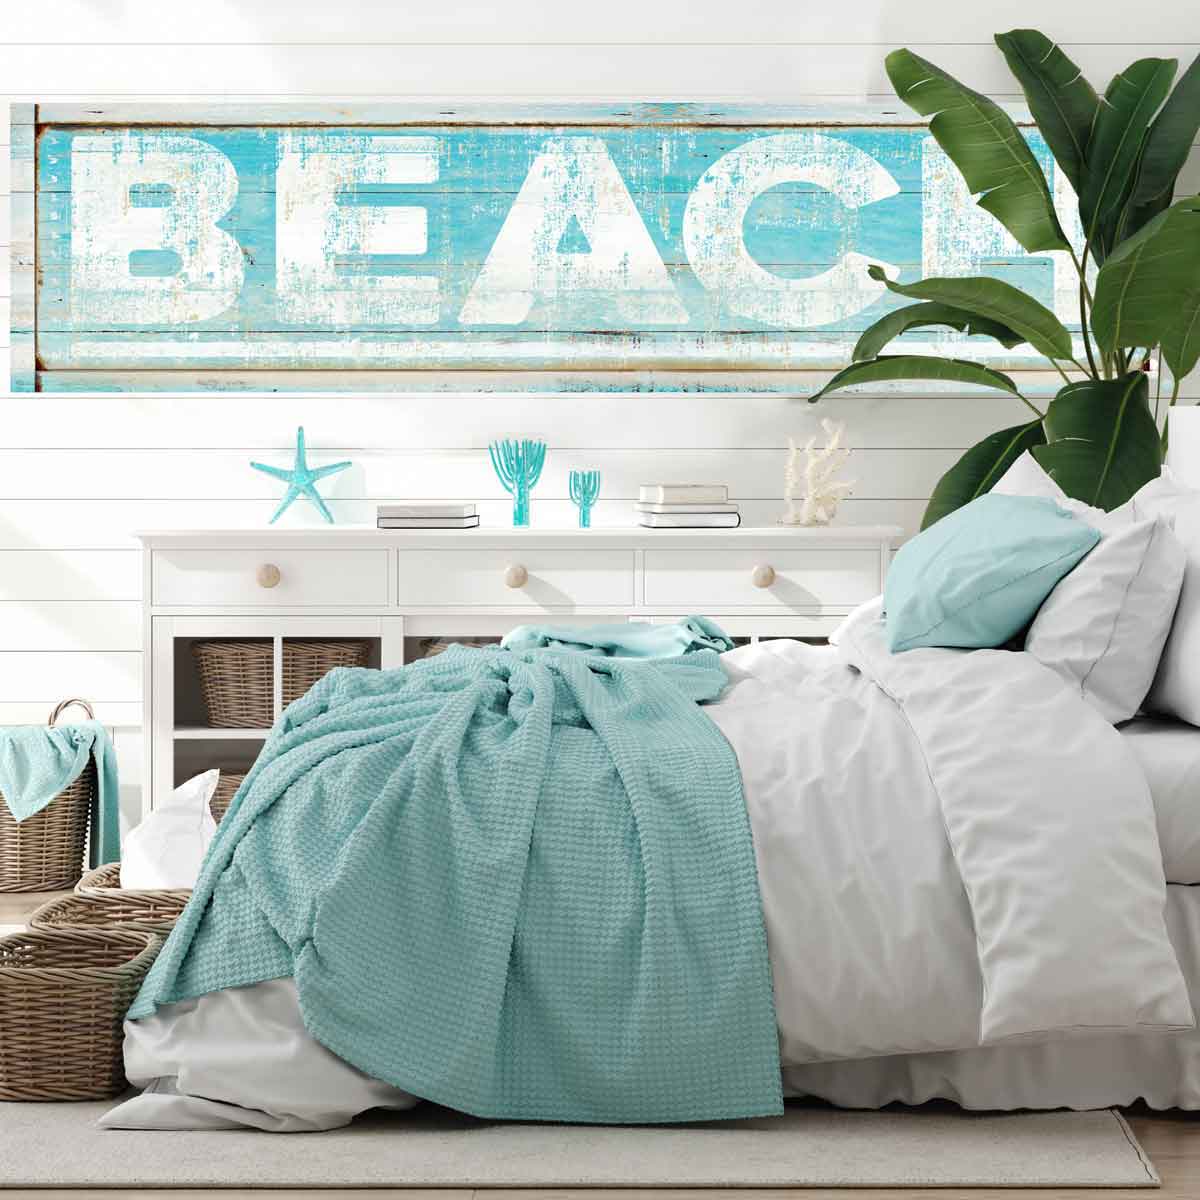 In white [Reads] Beach, White Arrow on Sign background in Teal Blue Distressed Wood Frame